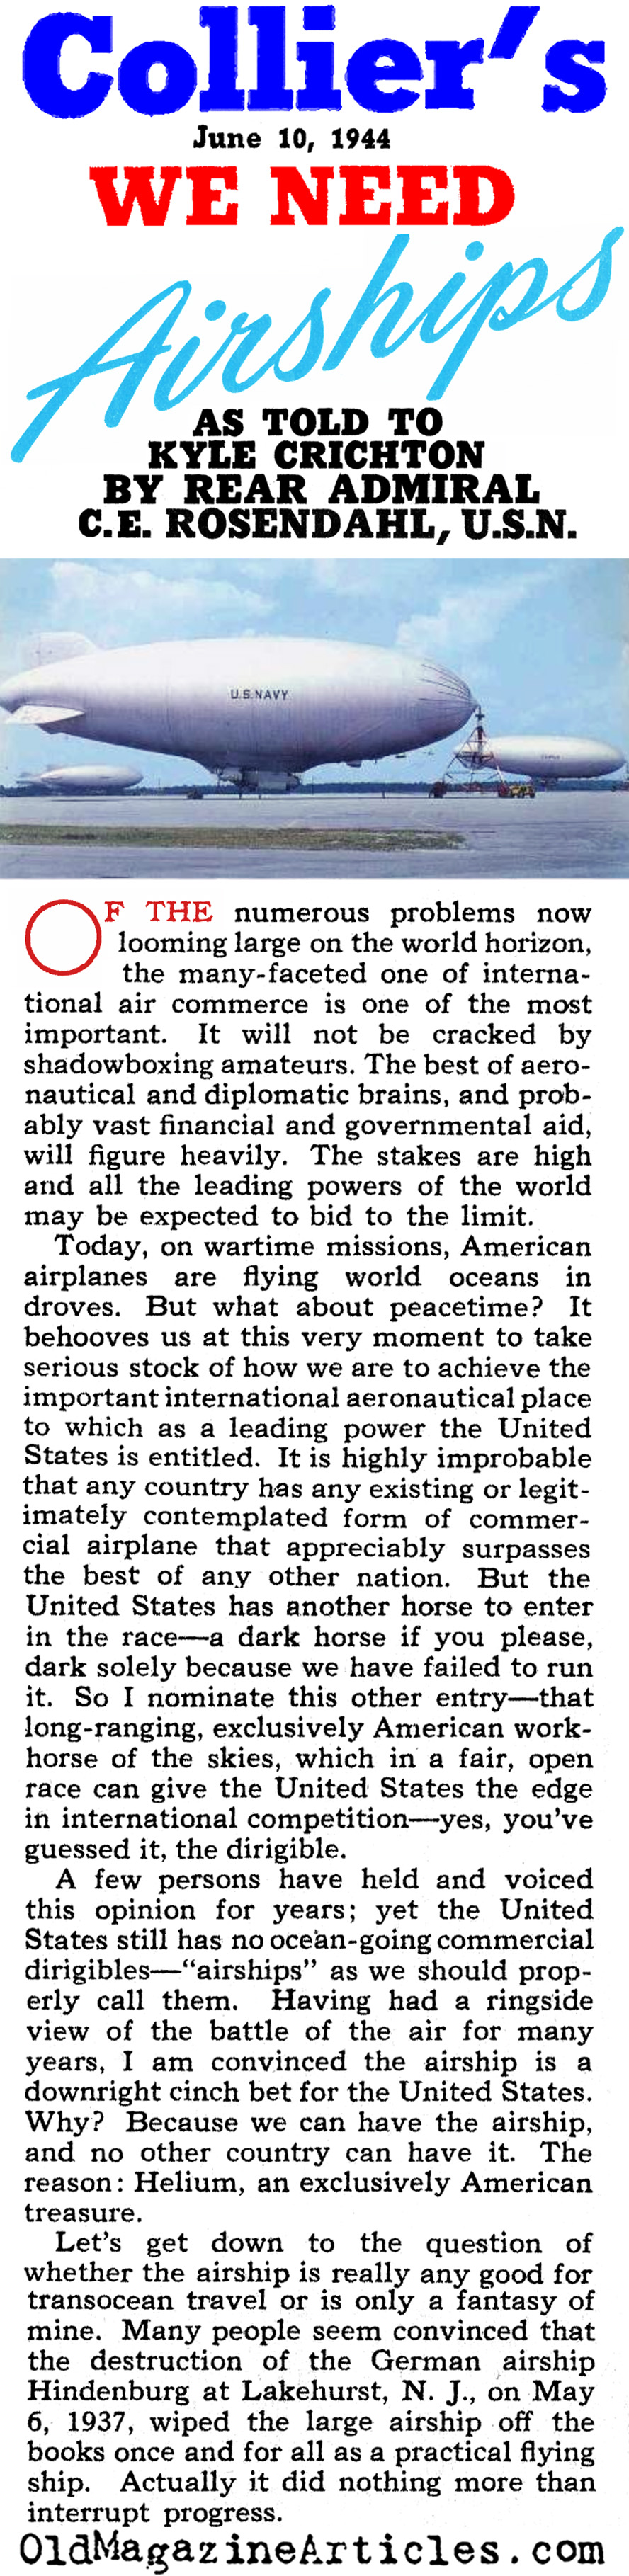 The Wonderment of Airships (Collier's Magazine, 1944)